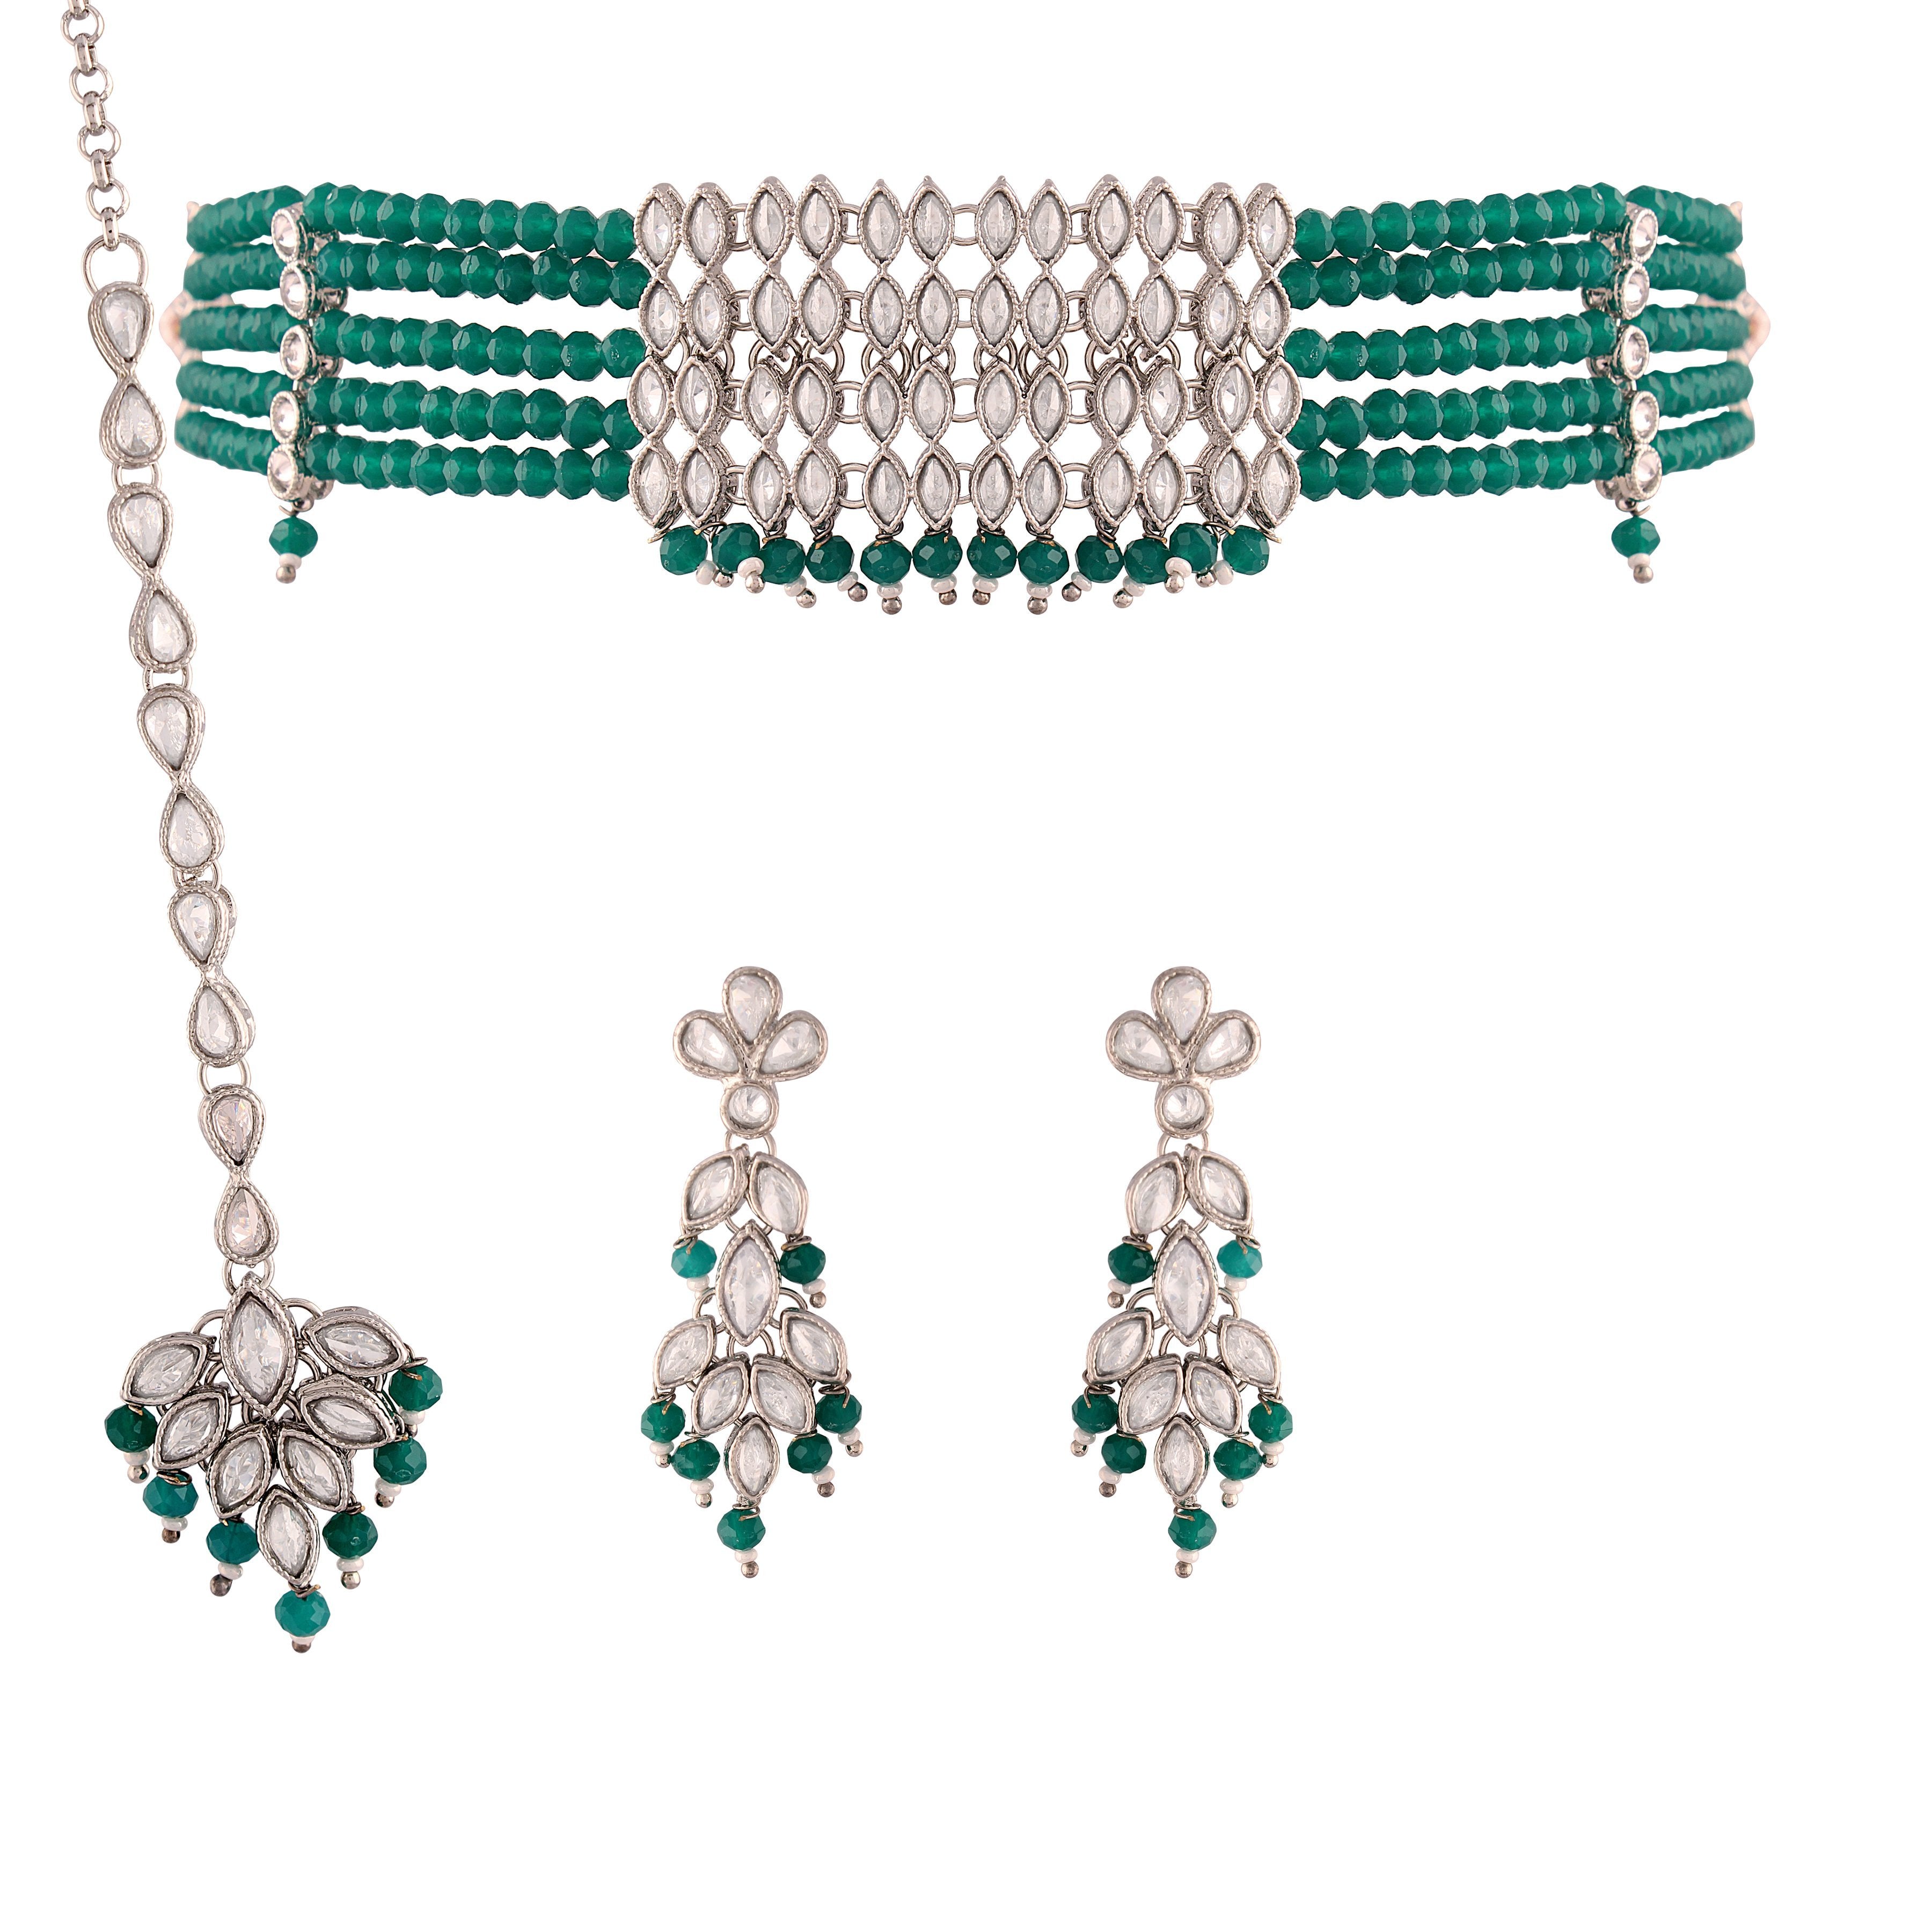 Women's Silver Plated Green Crystal Beads with Stone Studded Choker Necklace Set - i jewels